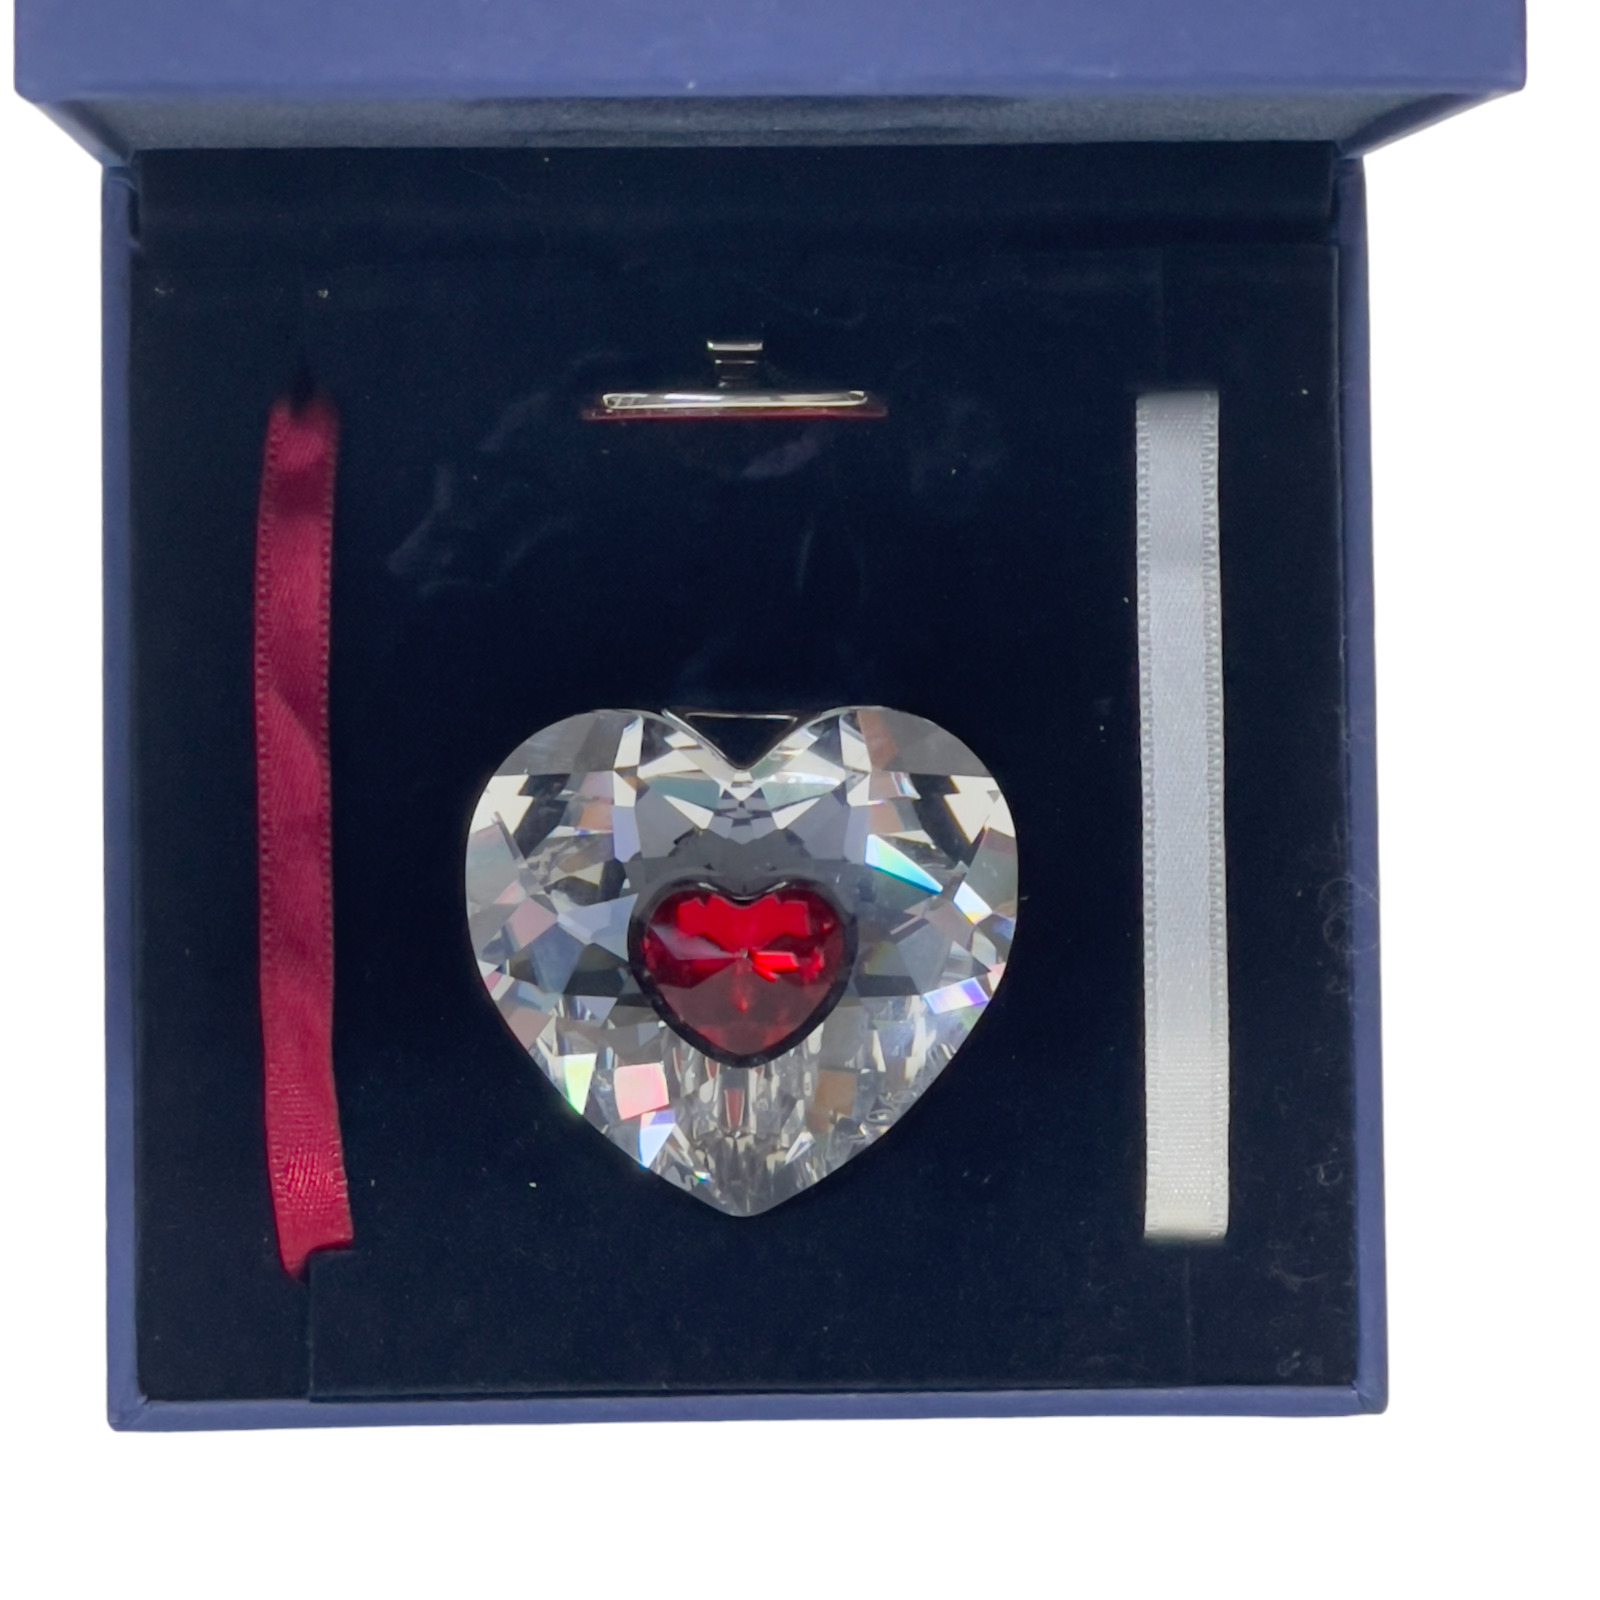 Swarovski Crystal Heart 2004 Pendant / Ornament See Pictures